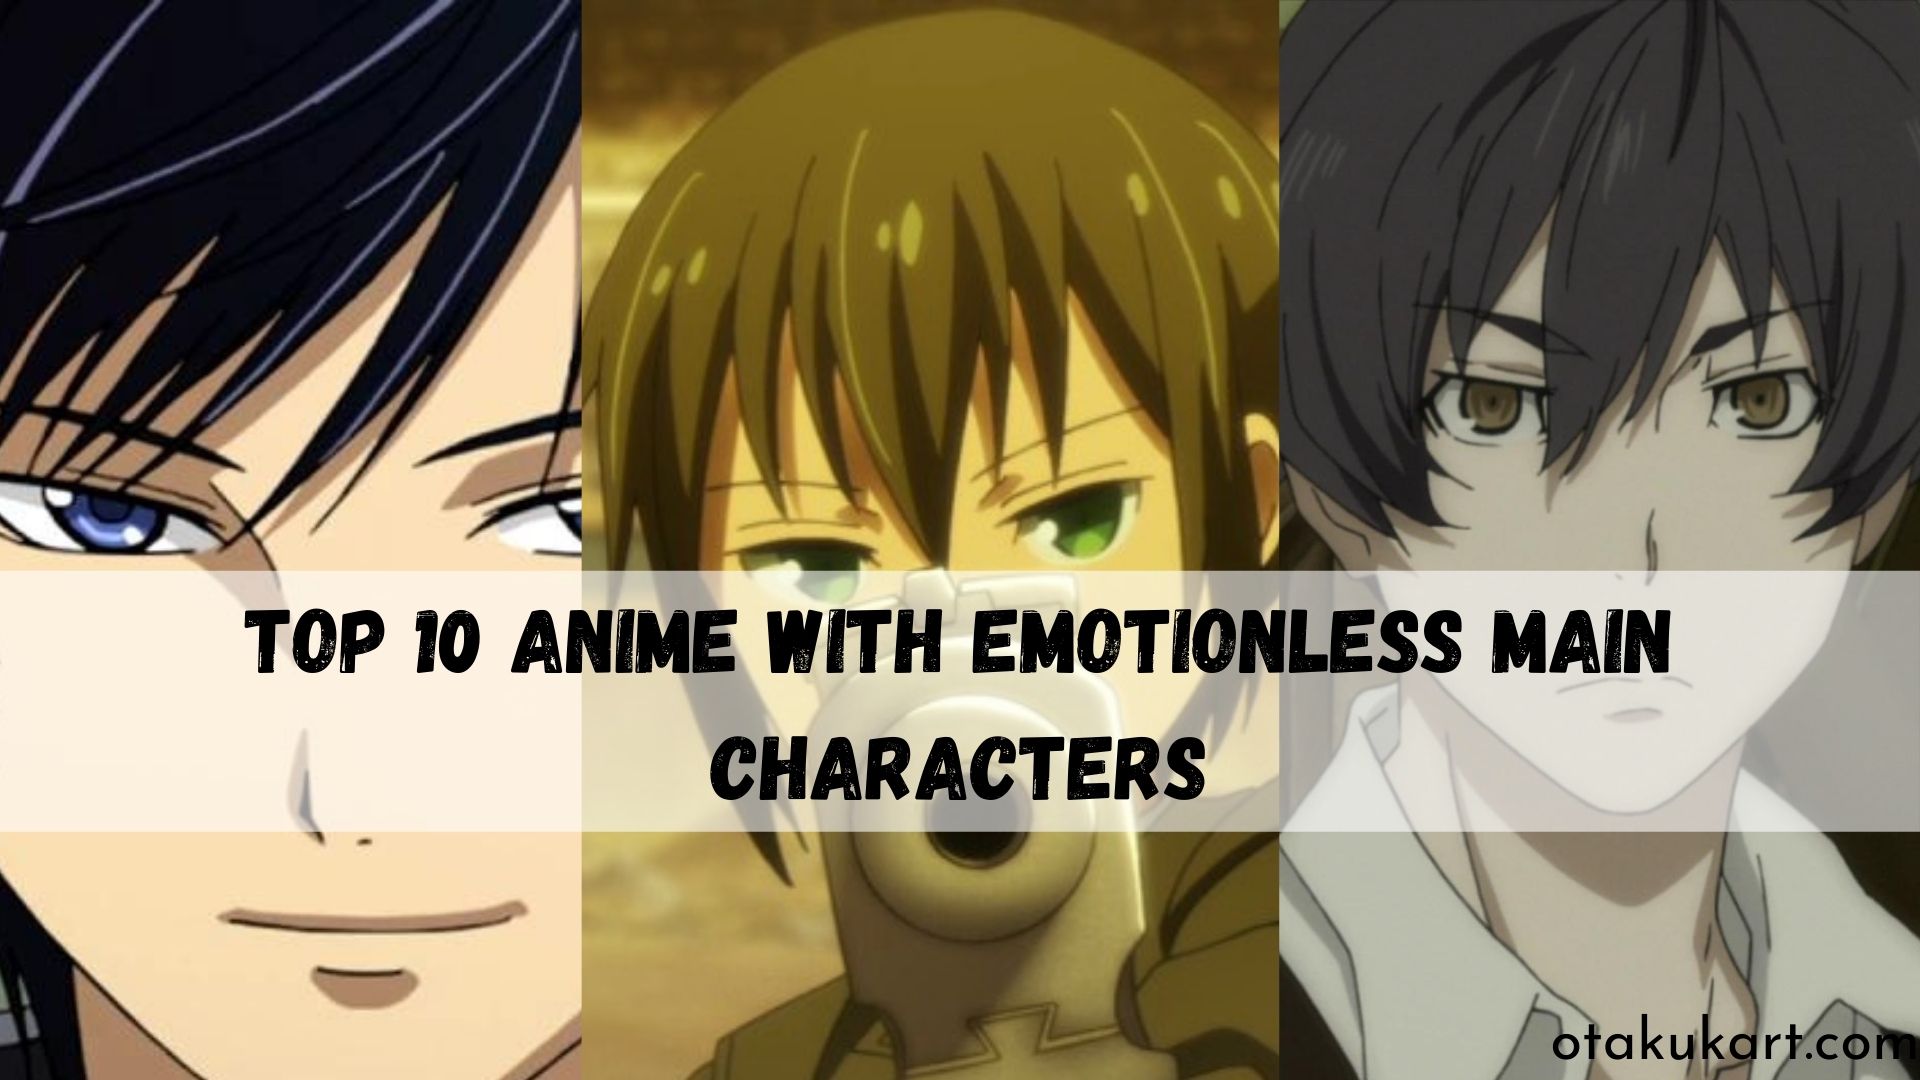 Top 10 Anime With Emotionless Main Character - OtakuKart